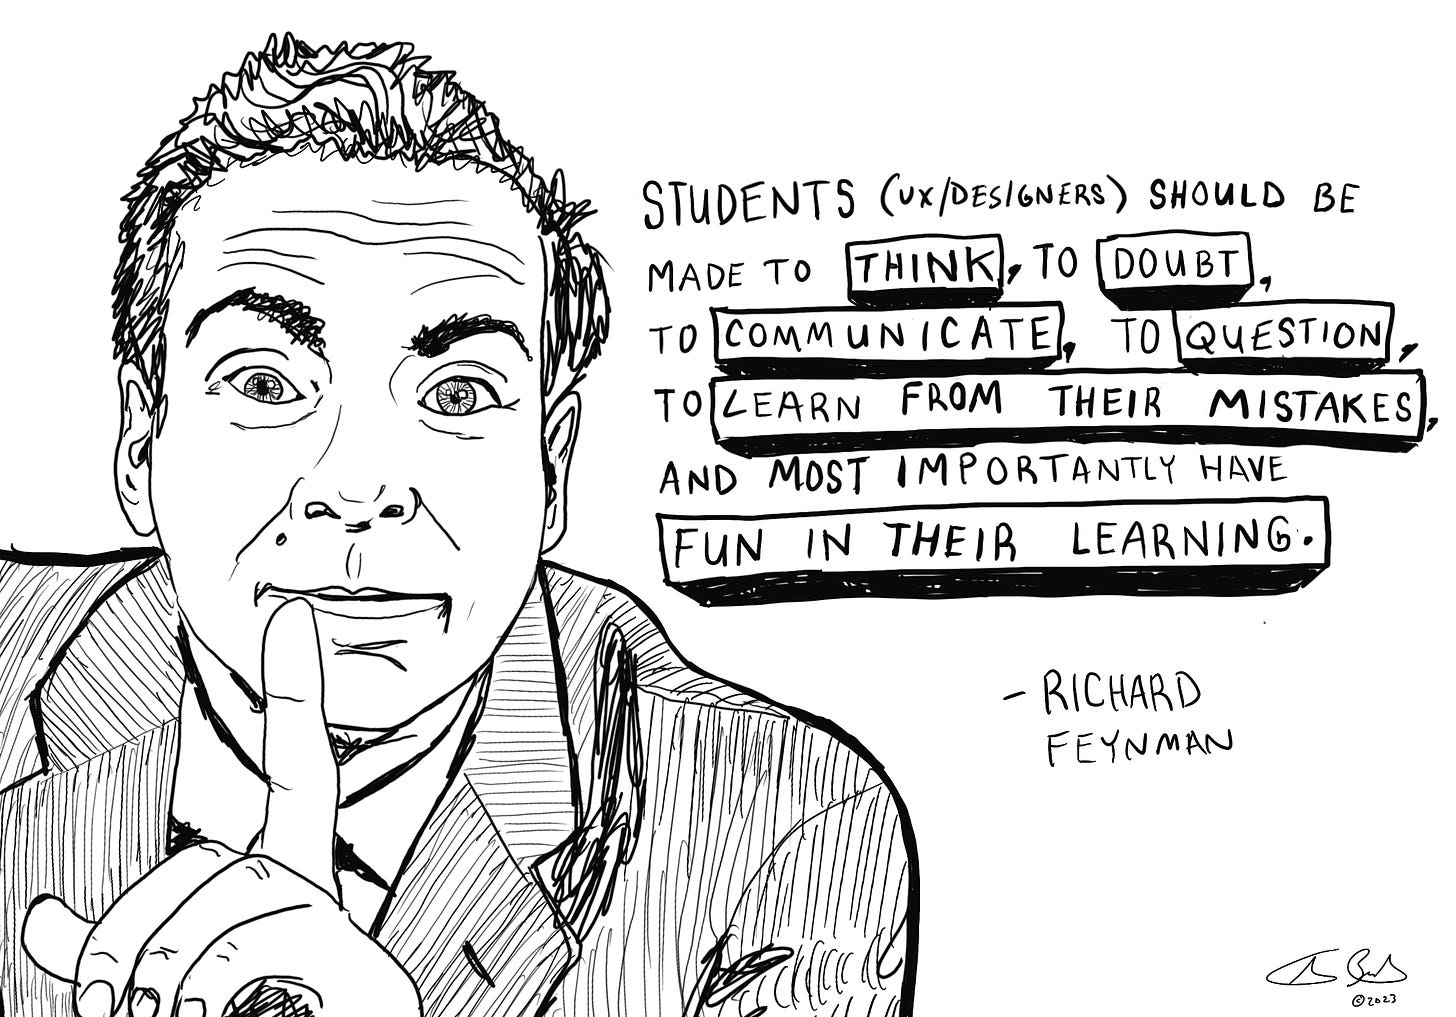 A drawing of Richard Feynman holding his finger up with a quote. “Students (UX/Designers), should be made to THINK, to DOUBT, to COMMUNICATE, to QUESTION, to LEARN from their mistakes, and most importantly have FUN IN THEIR LEARNING”. — Richard Feynman